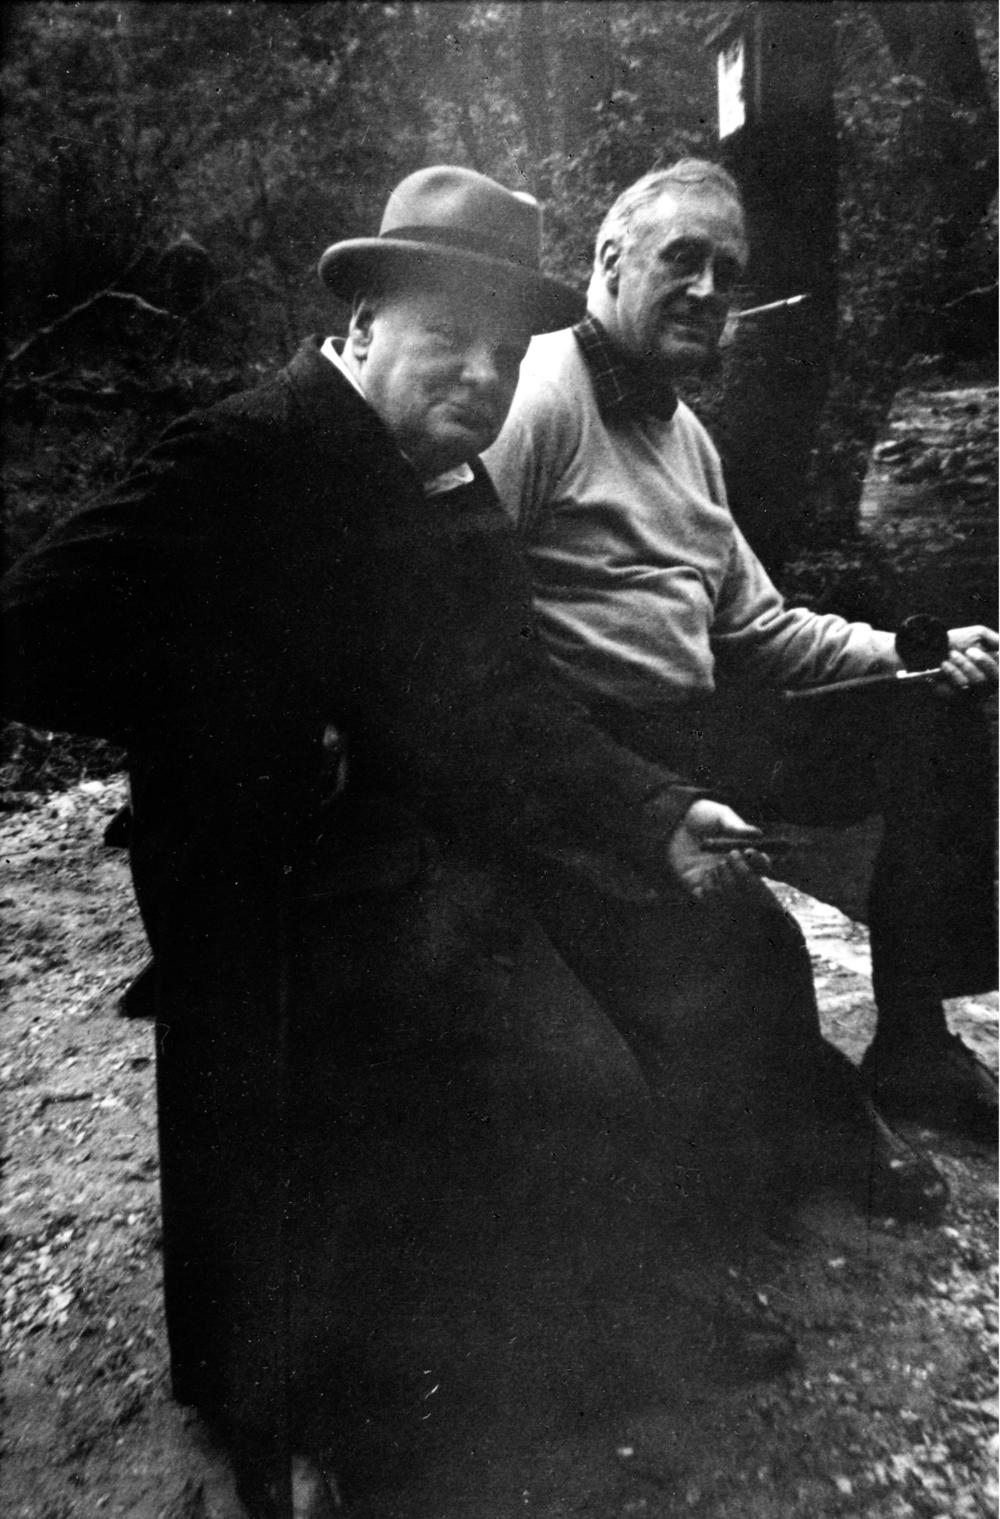 British Prime Minister Winston Churchill and President Franklin D. Roosevelt fishing in a stream at Camp David in May 1943. The presidential retreat was known as 